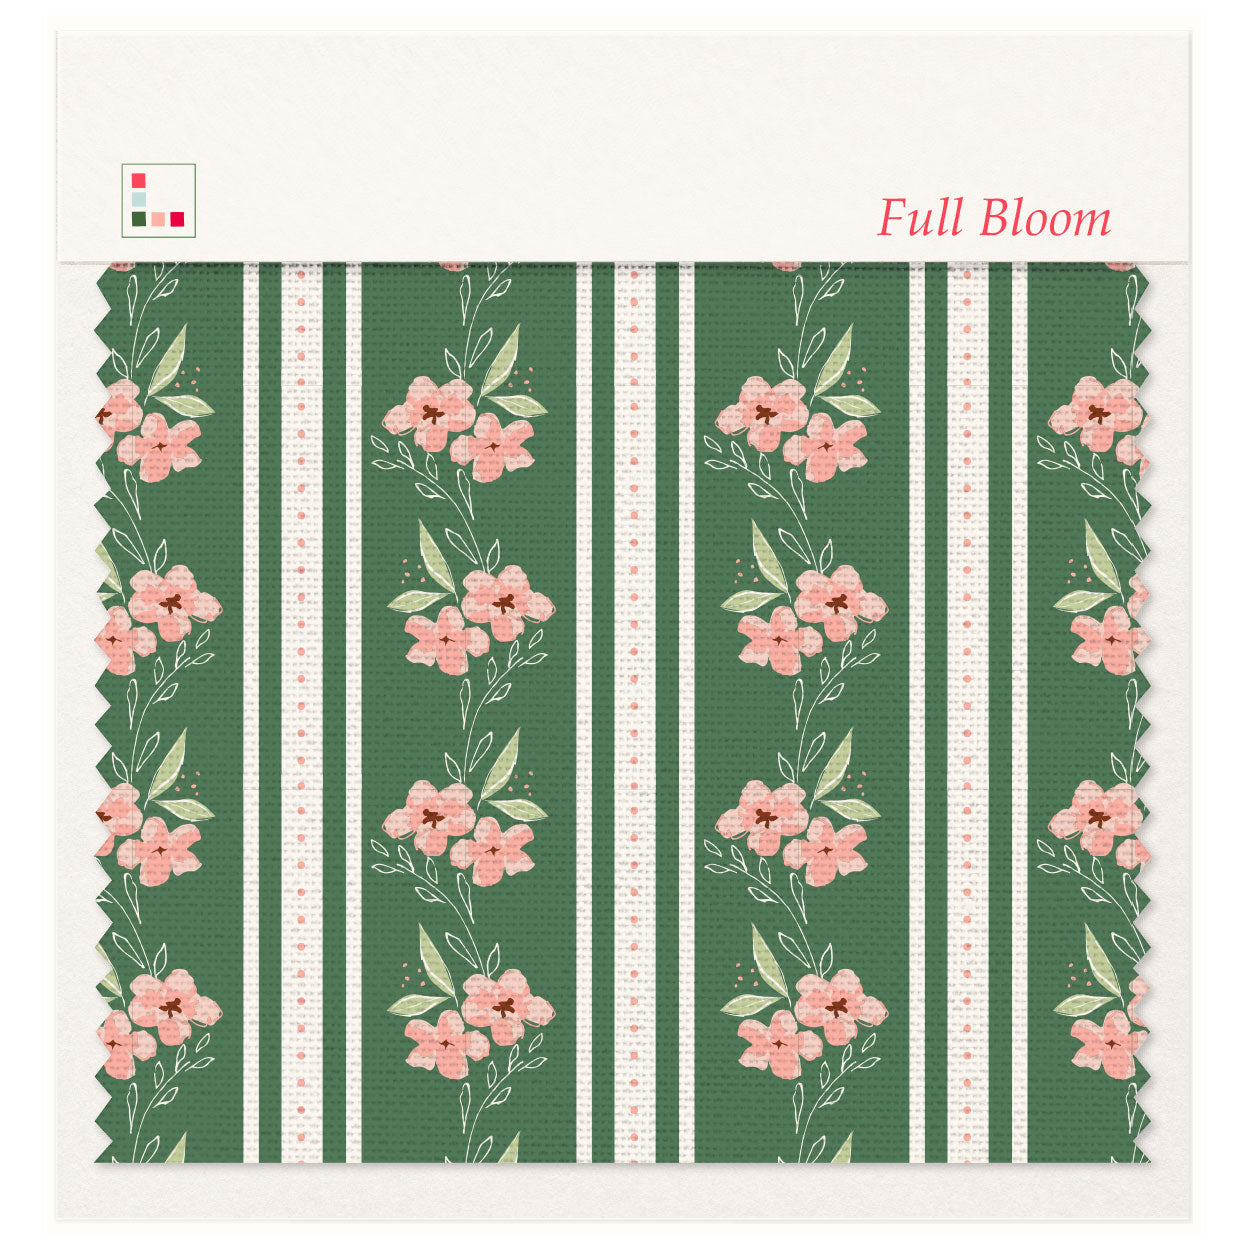 Five Patch Design Full Bloom fabric swatch